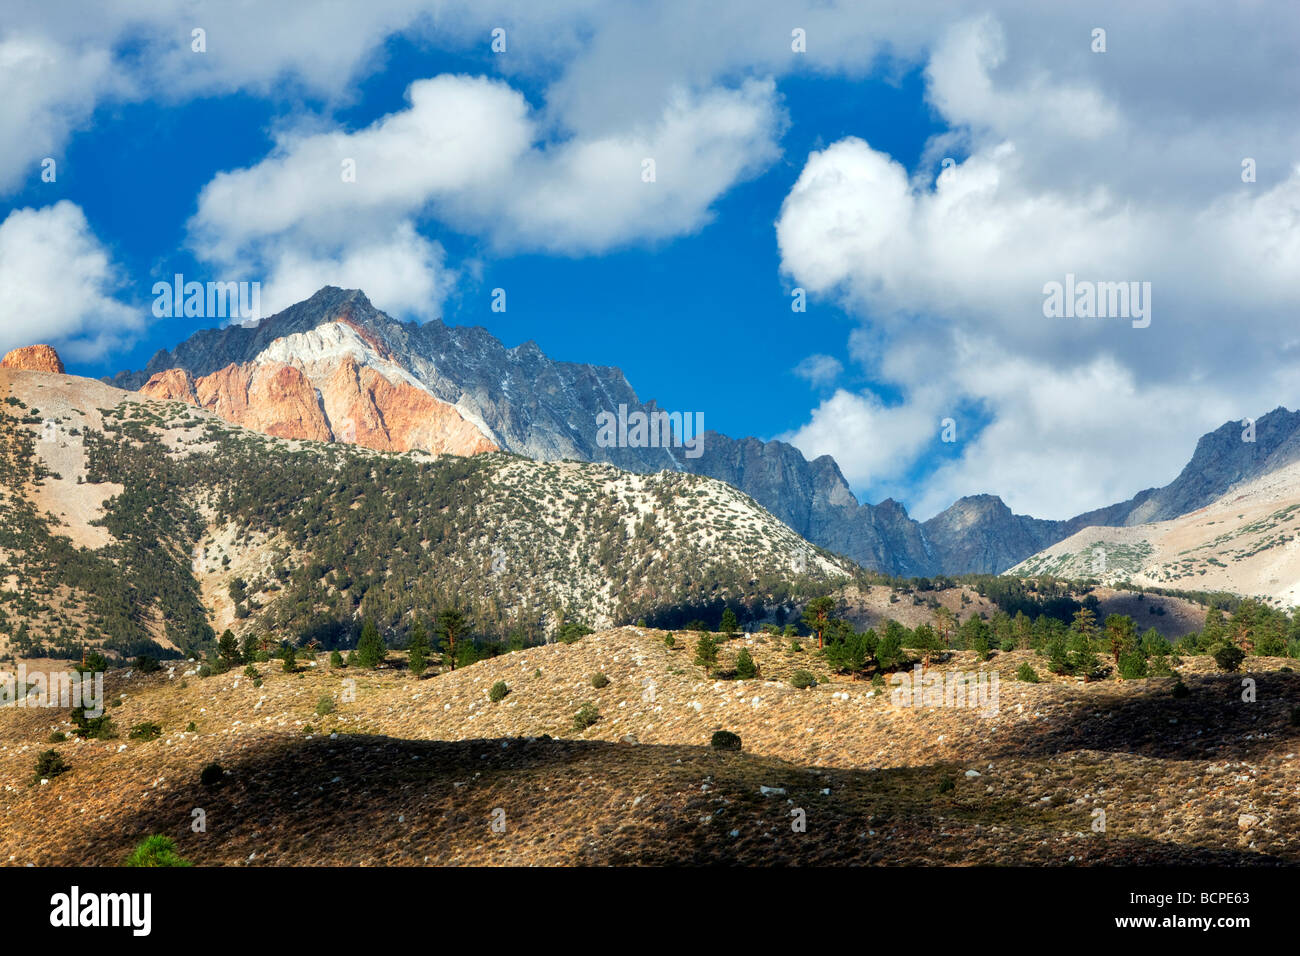 Cloud patterns over mountains Inyo National Forest Eastern Sierras California Stock Photo